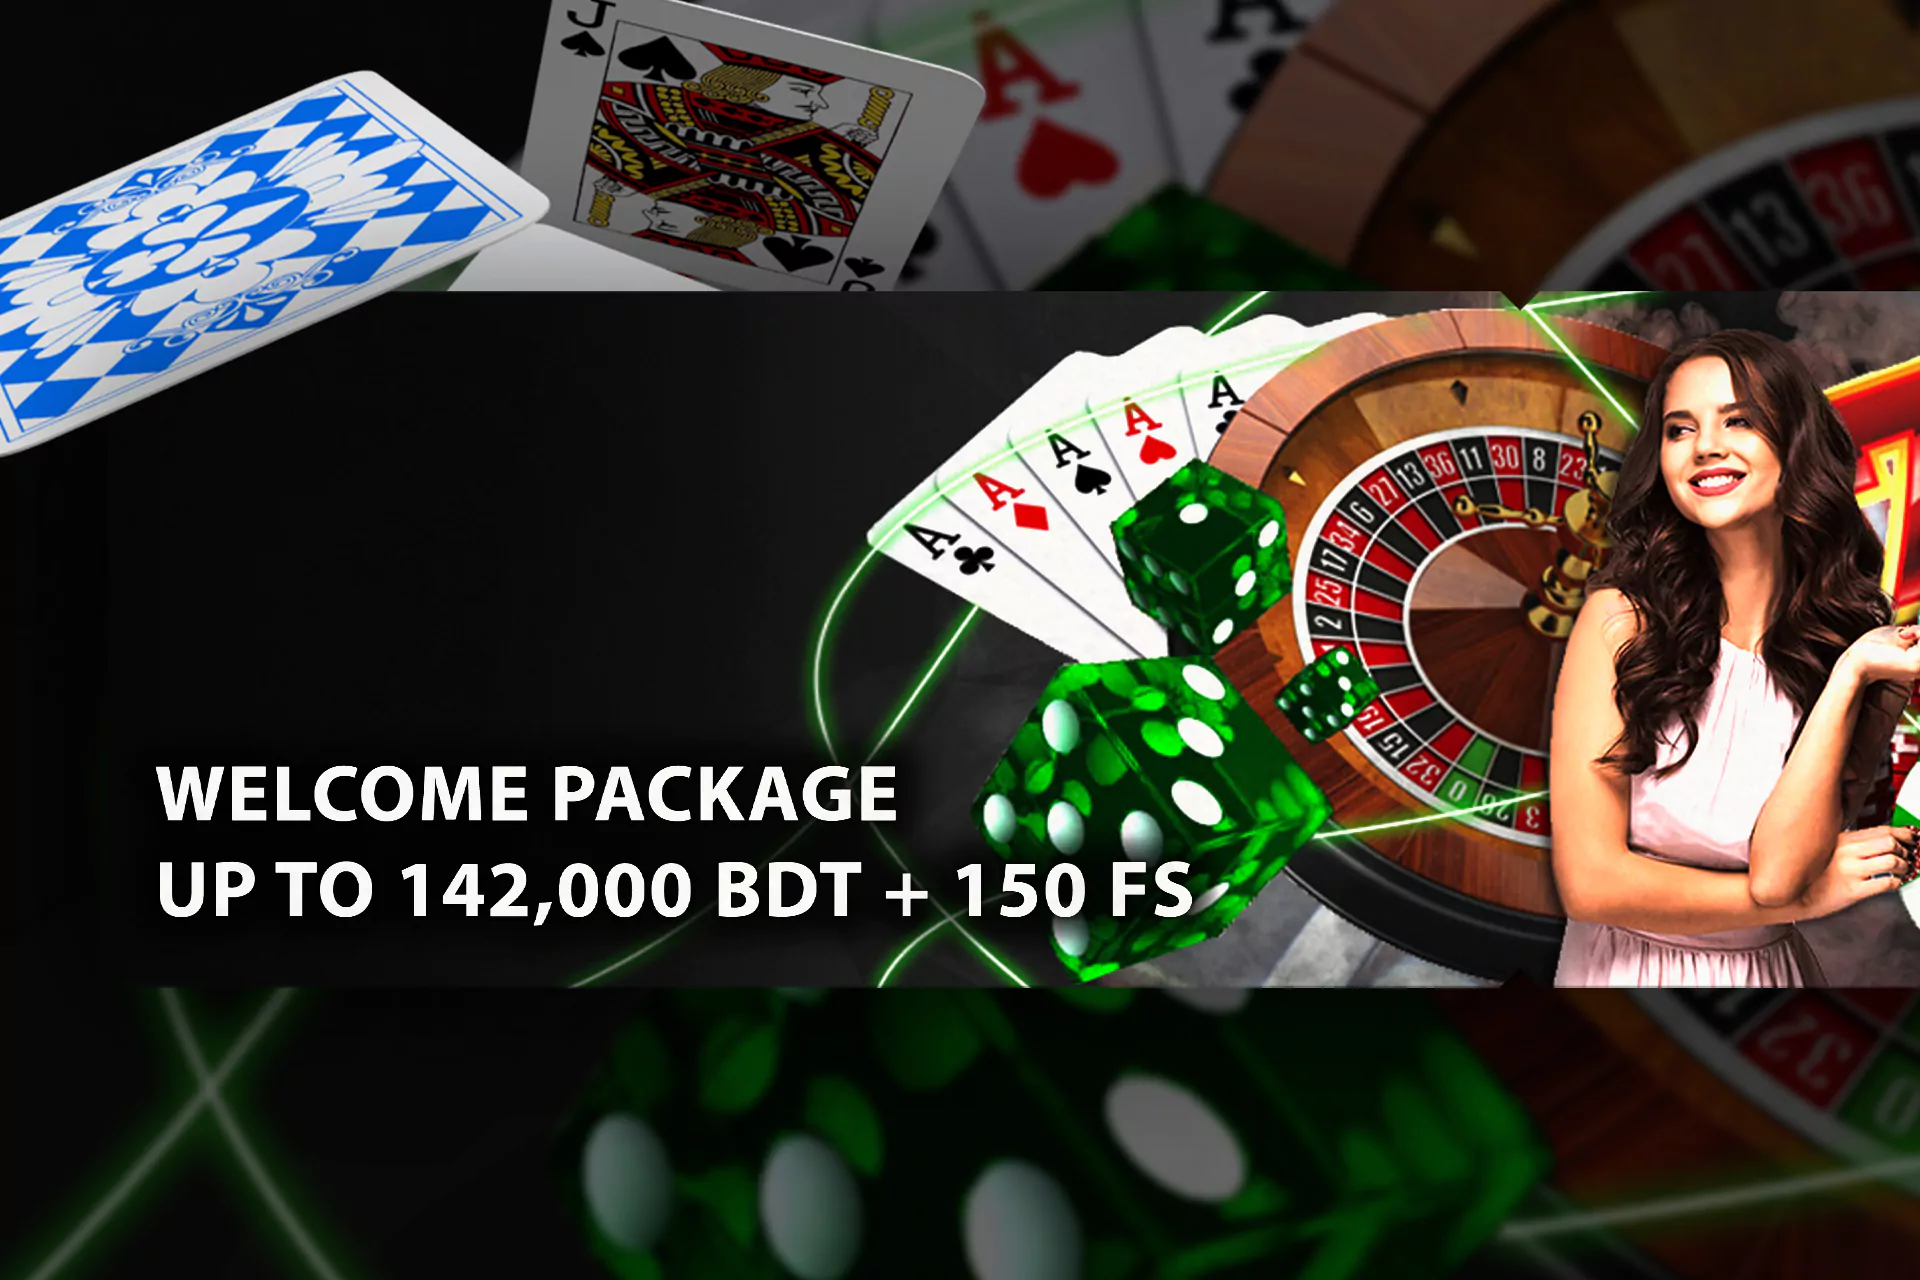 Casino fans have a special bonus offer on playing games.